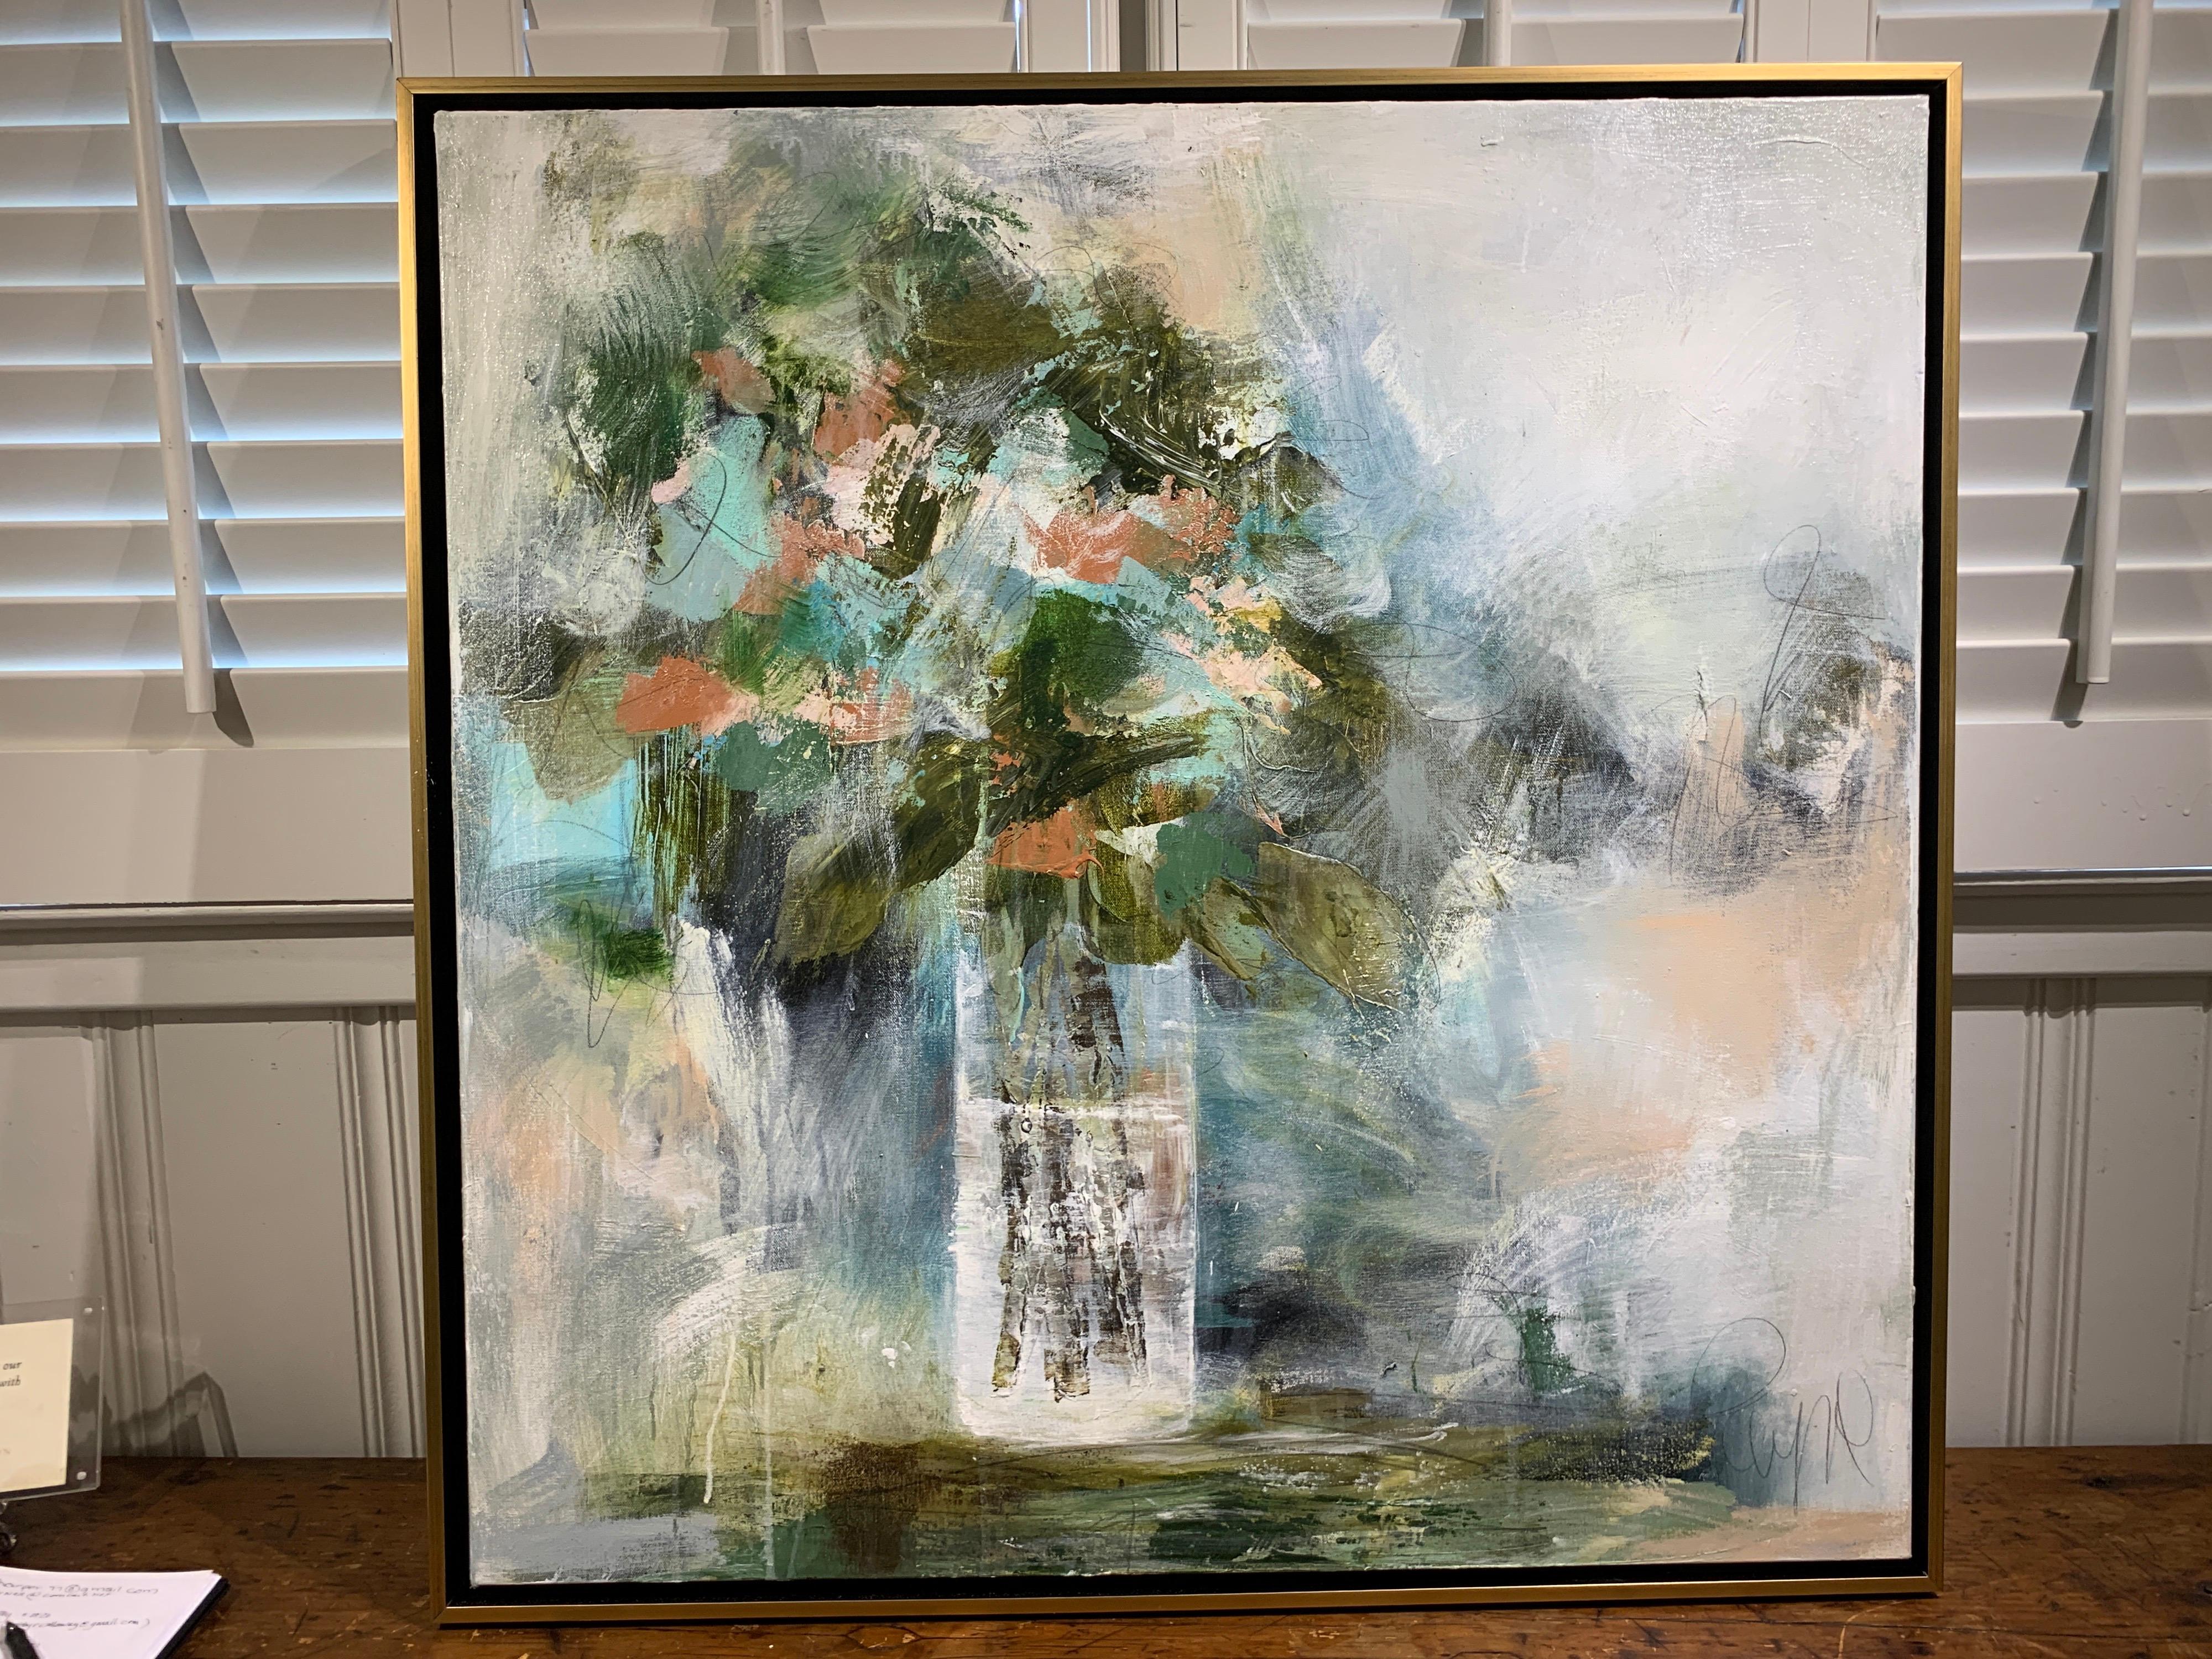 'My Love' is a medium size mixed media on canvas abstract floral painting of vertical format, created by American artist Melissa Payne Baker in 2021. Featuring a soft palette mostly made of blue, green, coral, and grey playing beautifully with the